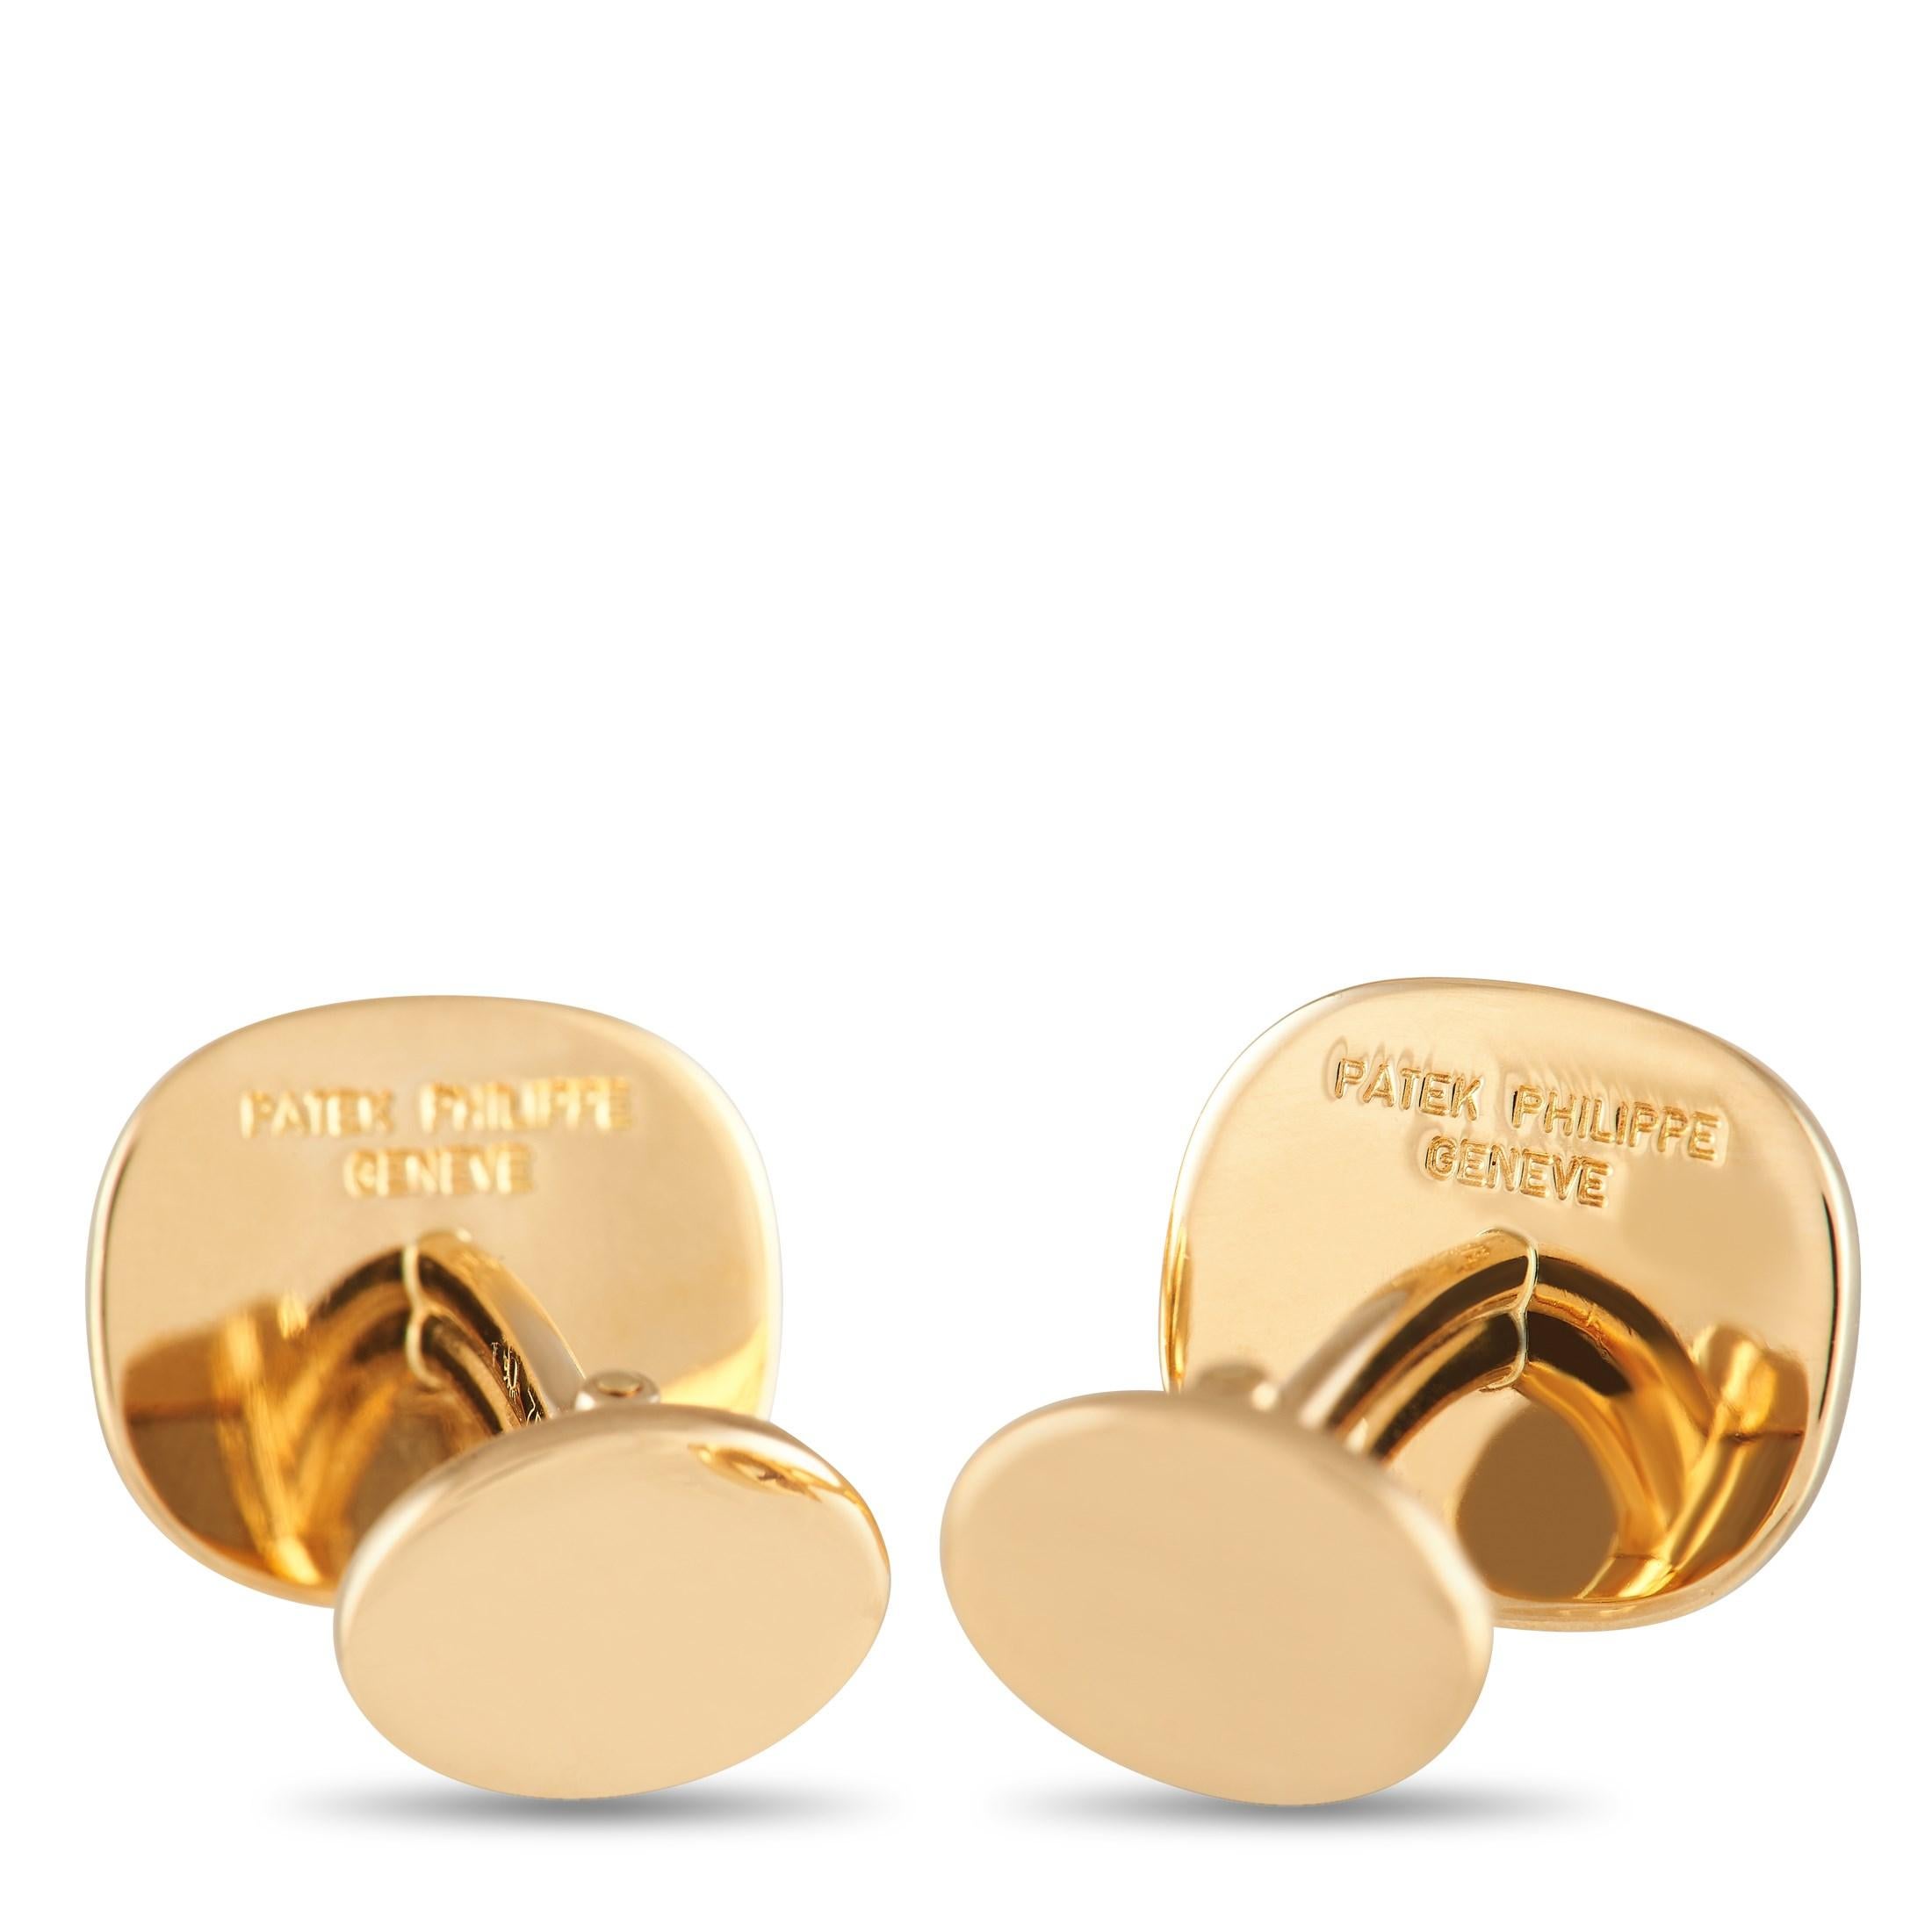 Simple and sophisticated in design, these Patek Philippe Ellipse Cufflinks are ready to provide any suited ensemble with a luxurious finishing touch. Crafted from 18K Yellow Gold, each oval-shaped cufflink measures 0.65” long and 0.50” wide.

This